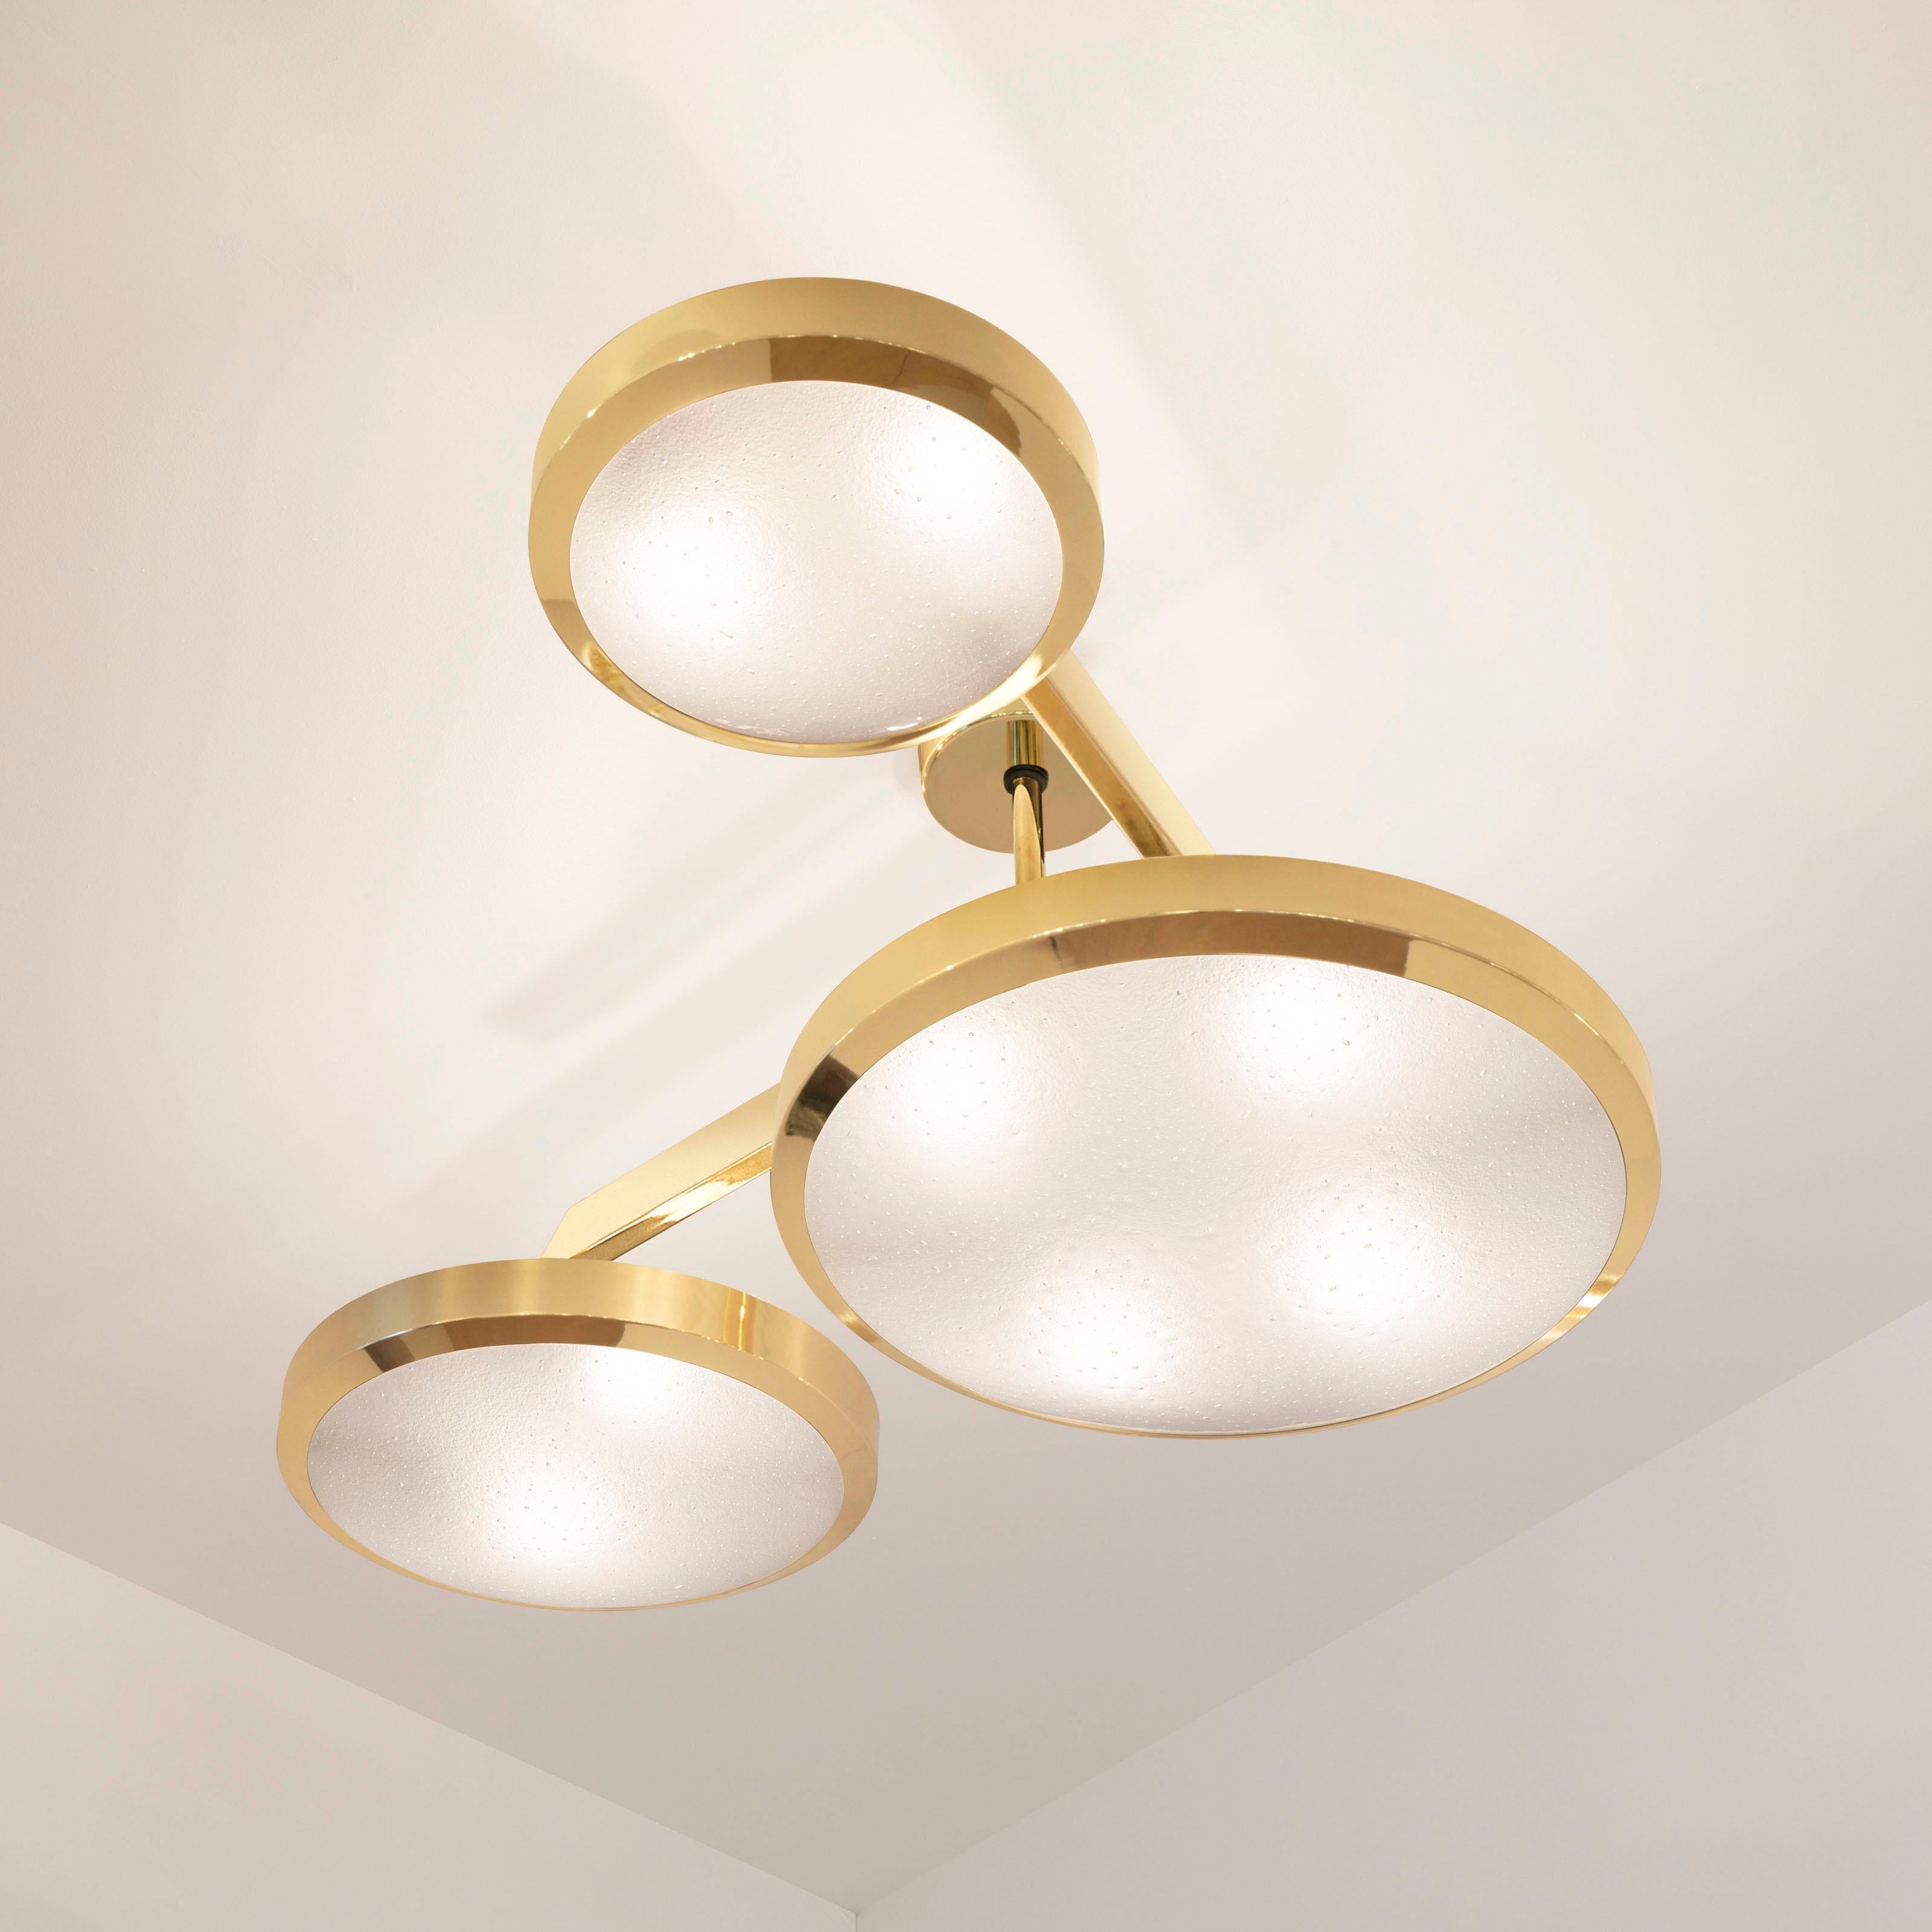 The Zeta ceiling light features a composition of variable sized Murano glass shades methodically balanced on a “V” shaped brass frame. The first images show the fixture in our polished brass finish-subsequent pictures show it in a selection of